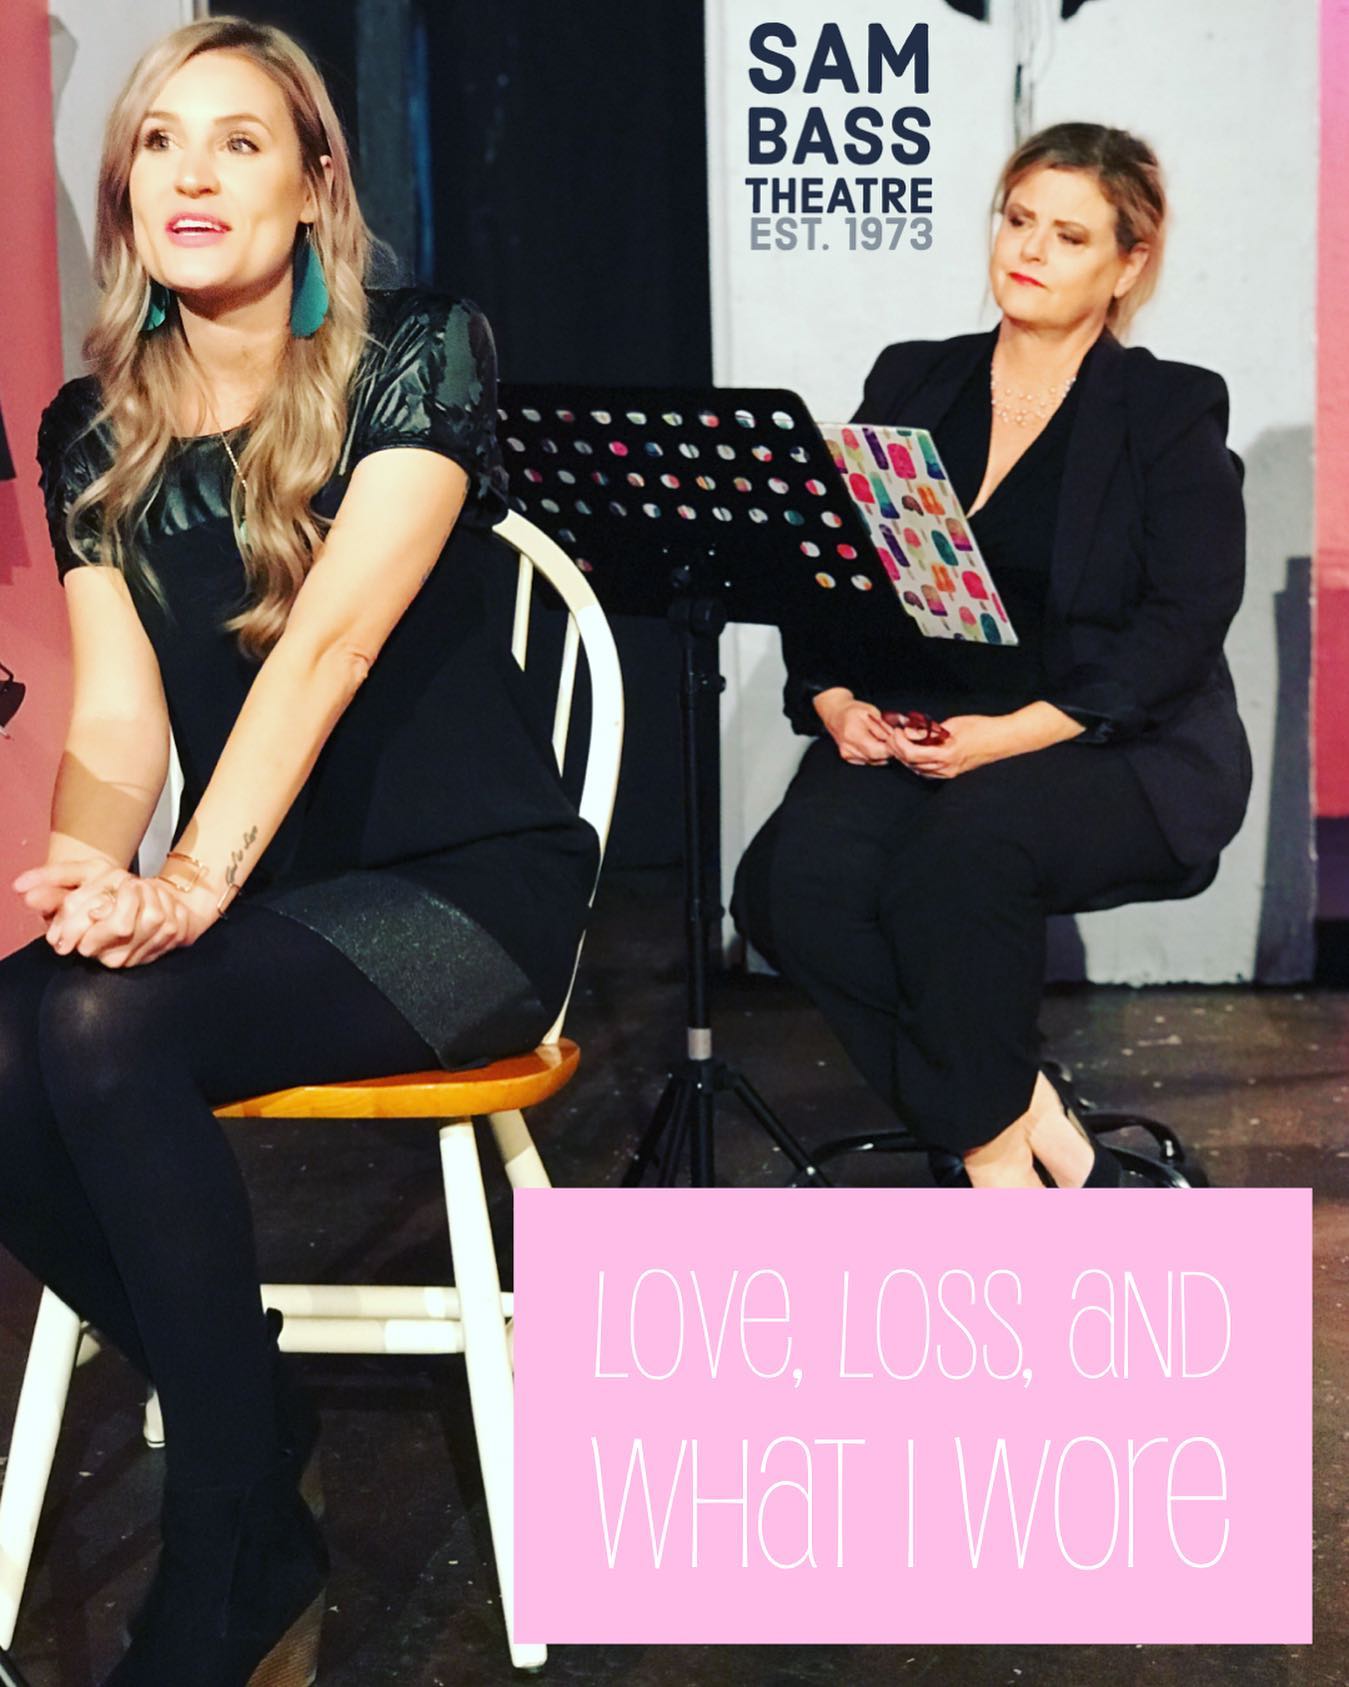 Love, Loss and What I Wore by Sam Bass Theatre Association